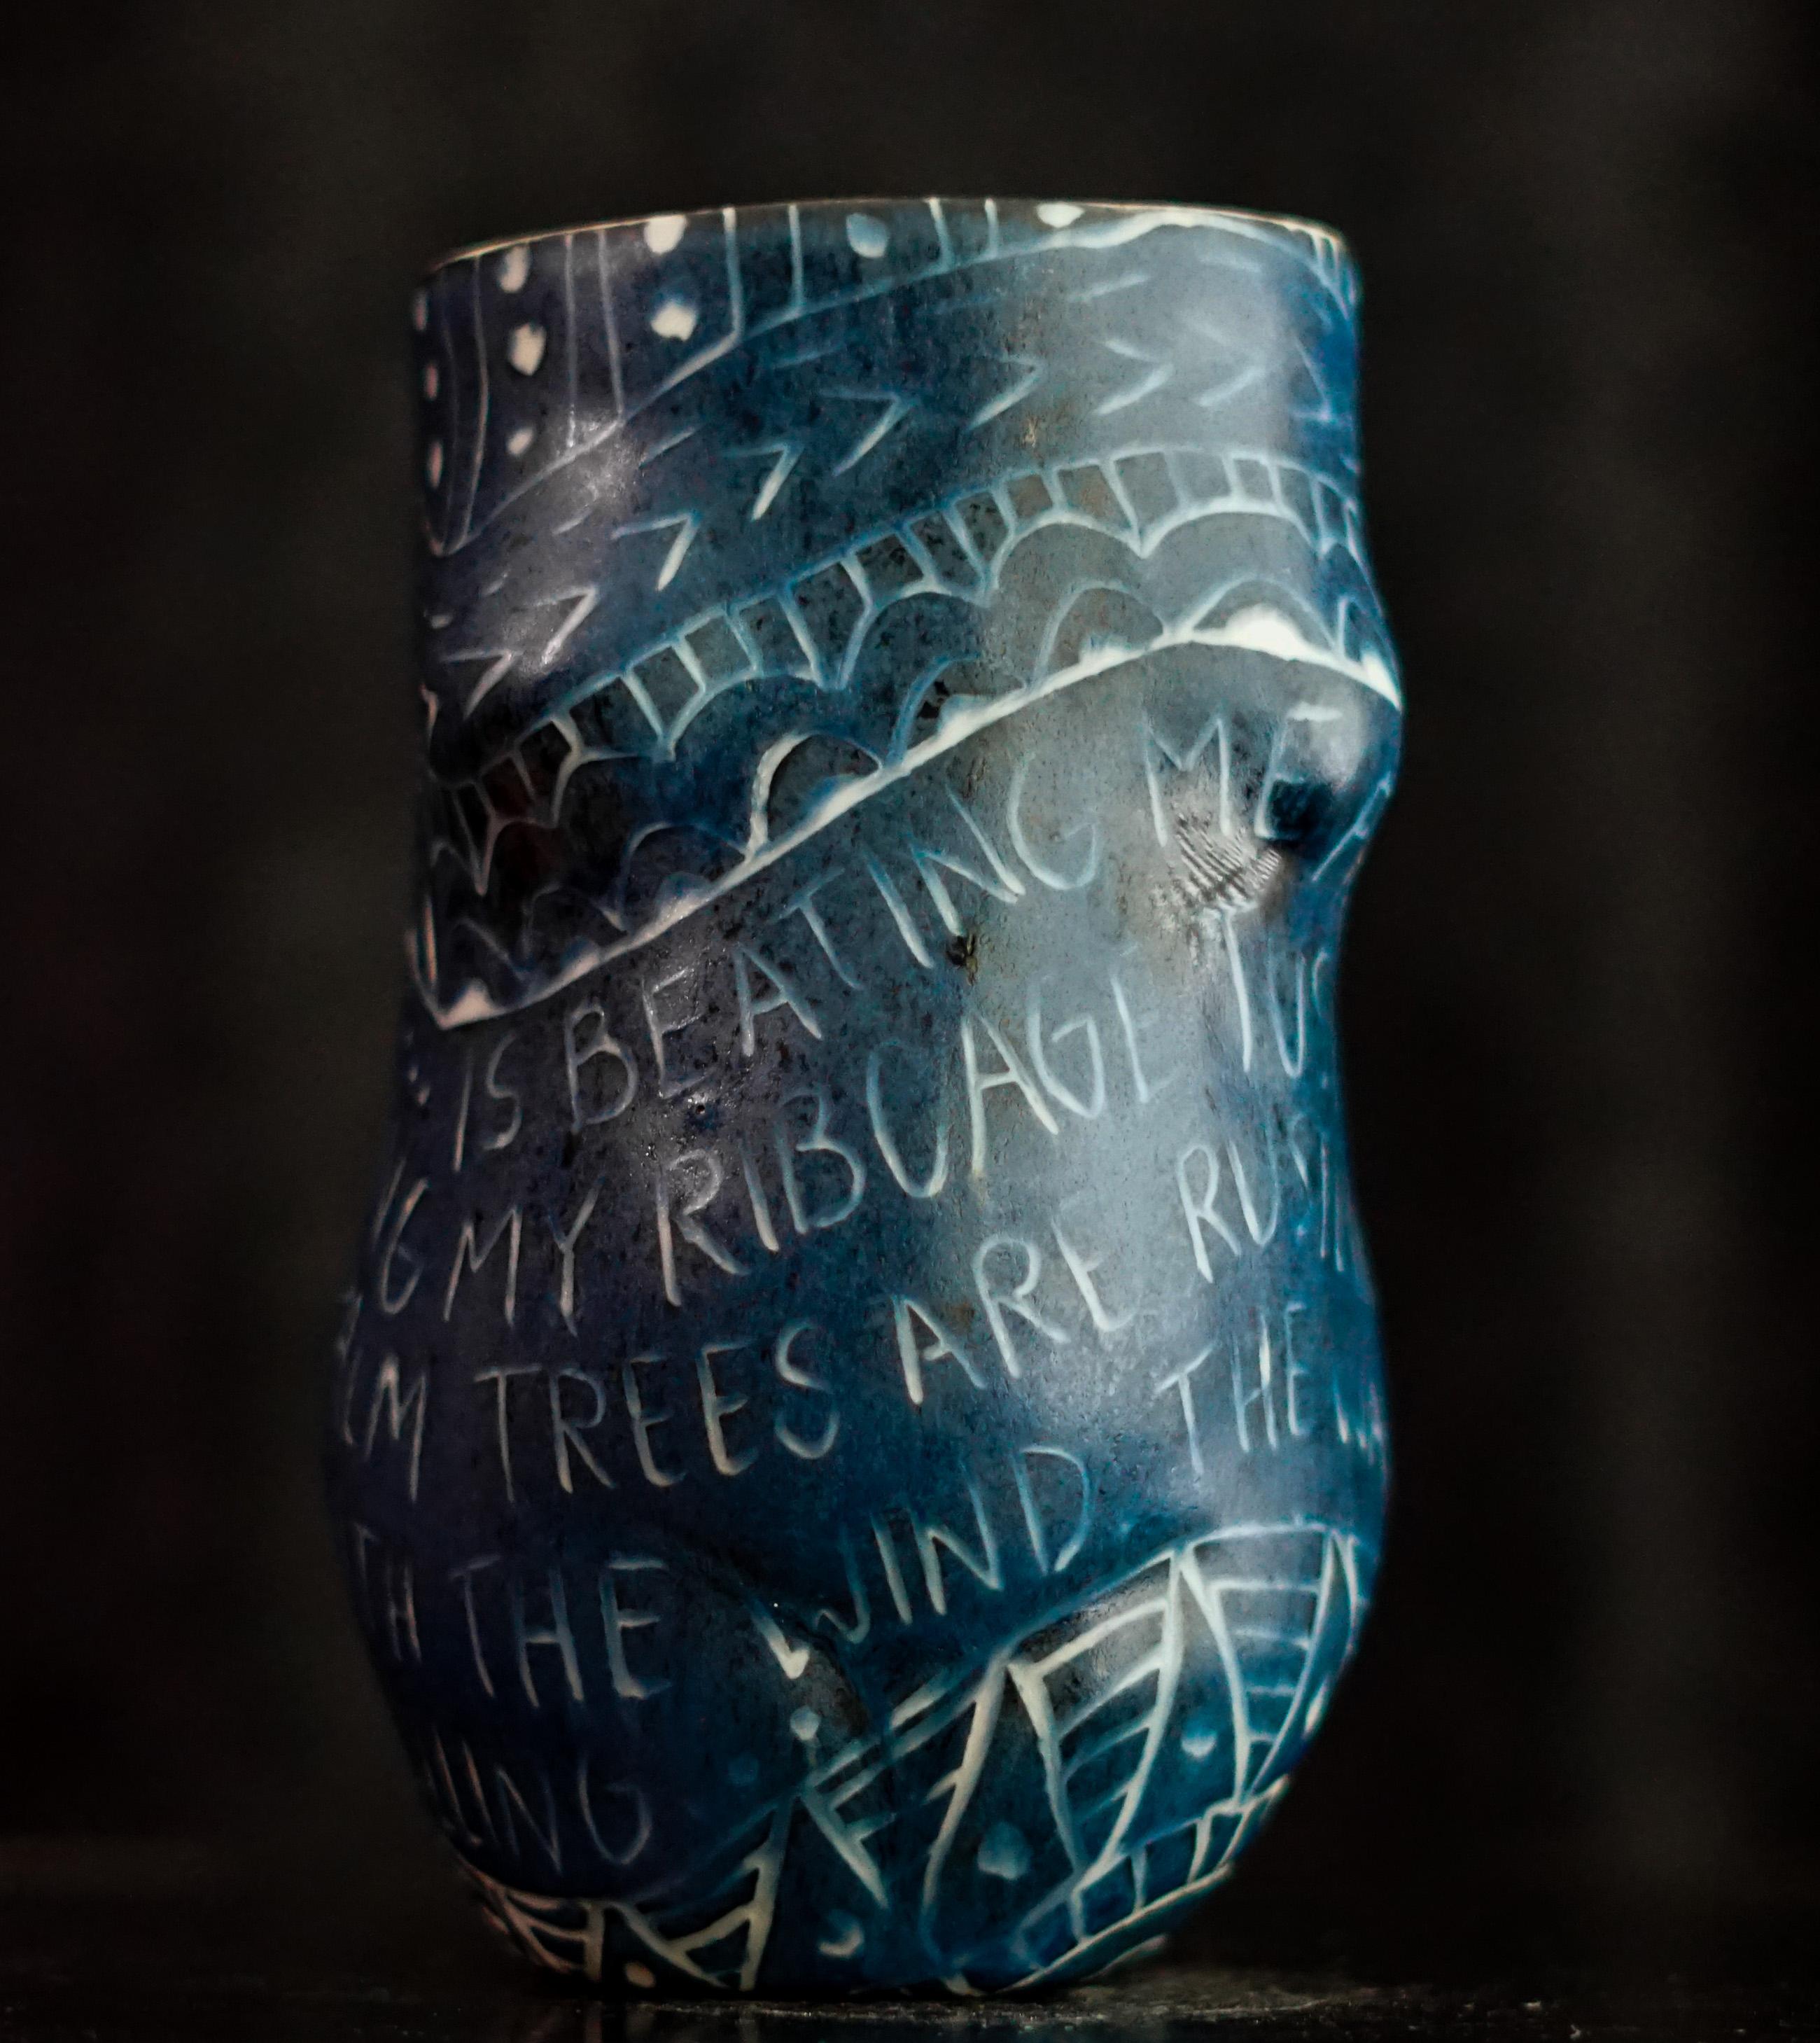 “...Is Beating Me From the Inside...” Porcelain cup with sgraffito detailing - Sculpture by Alex Hodge